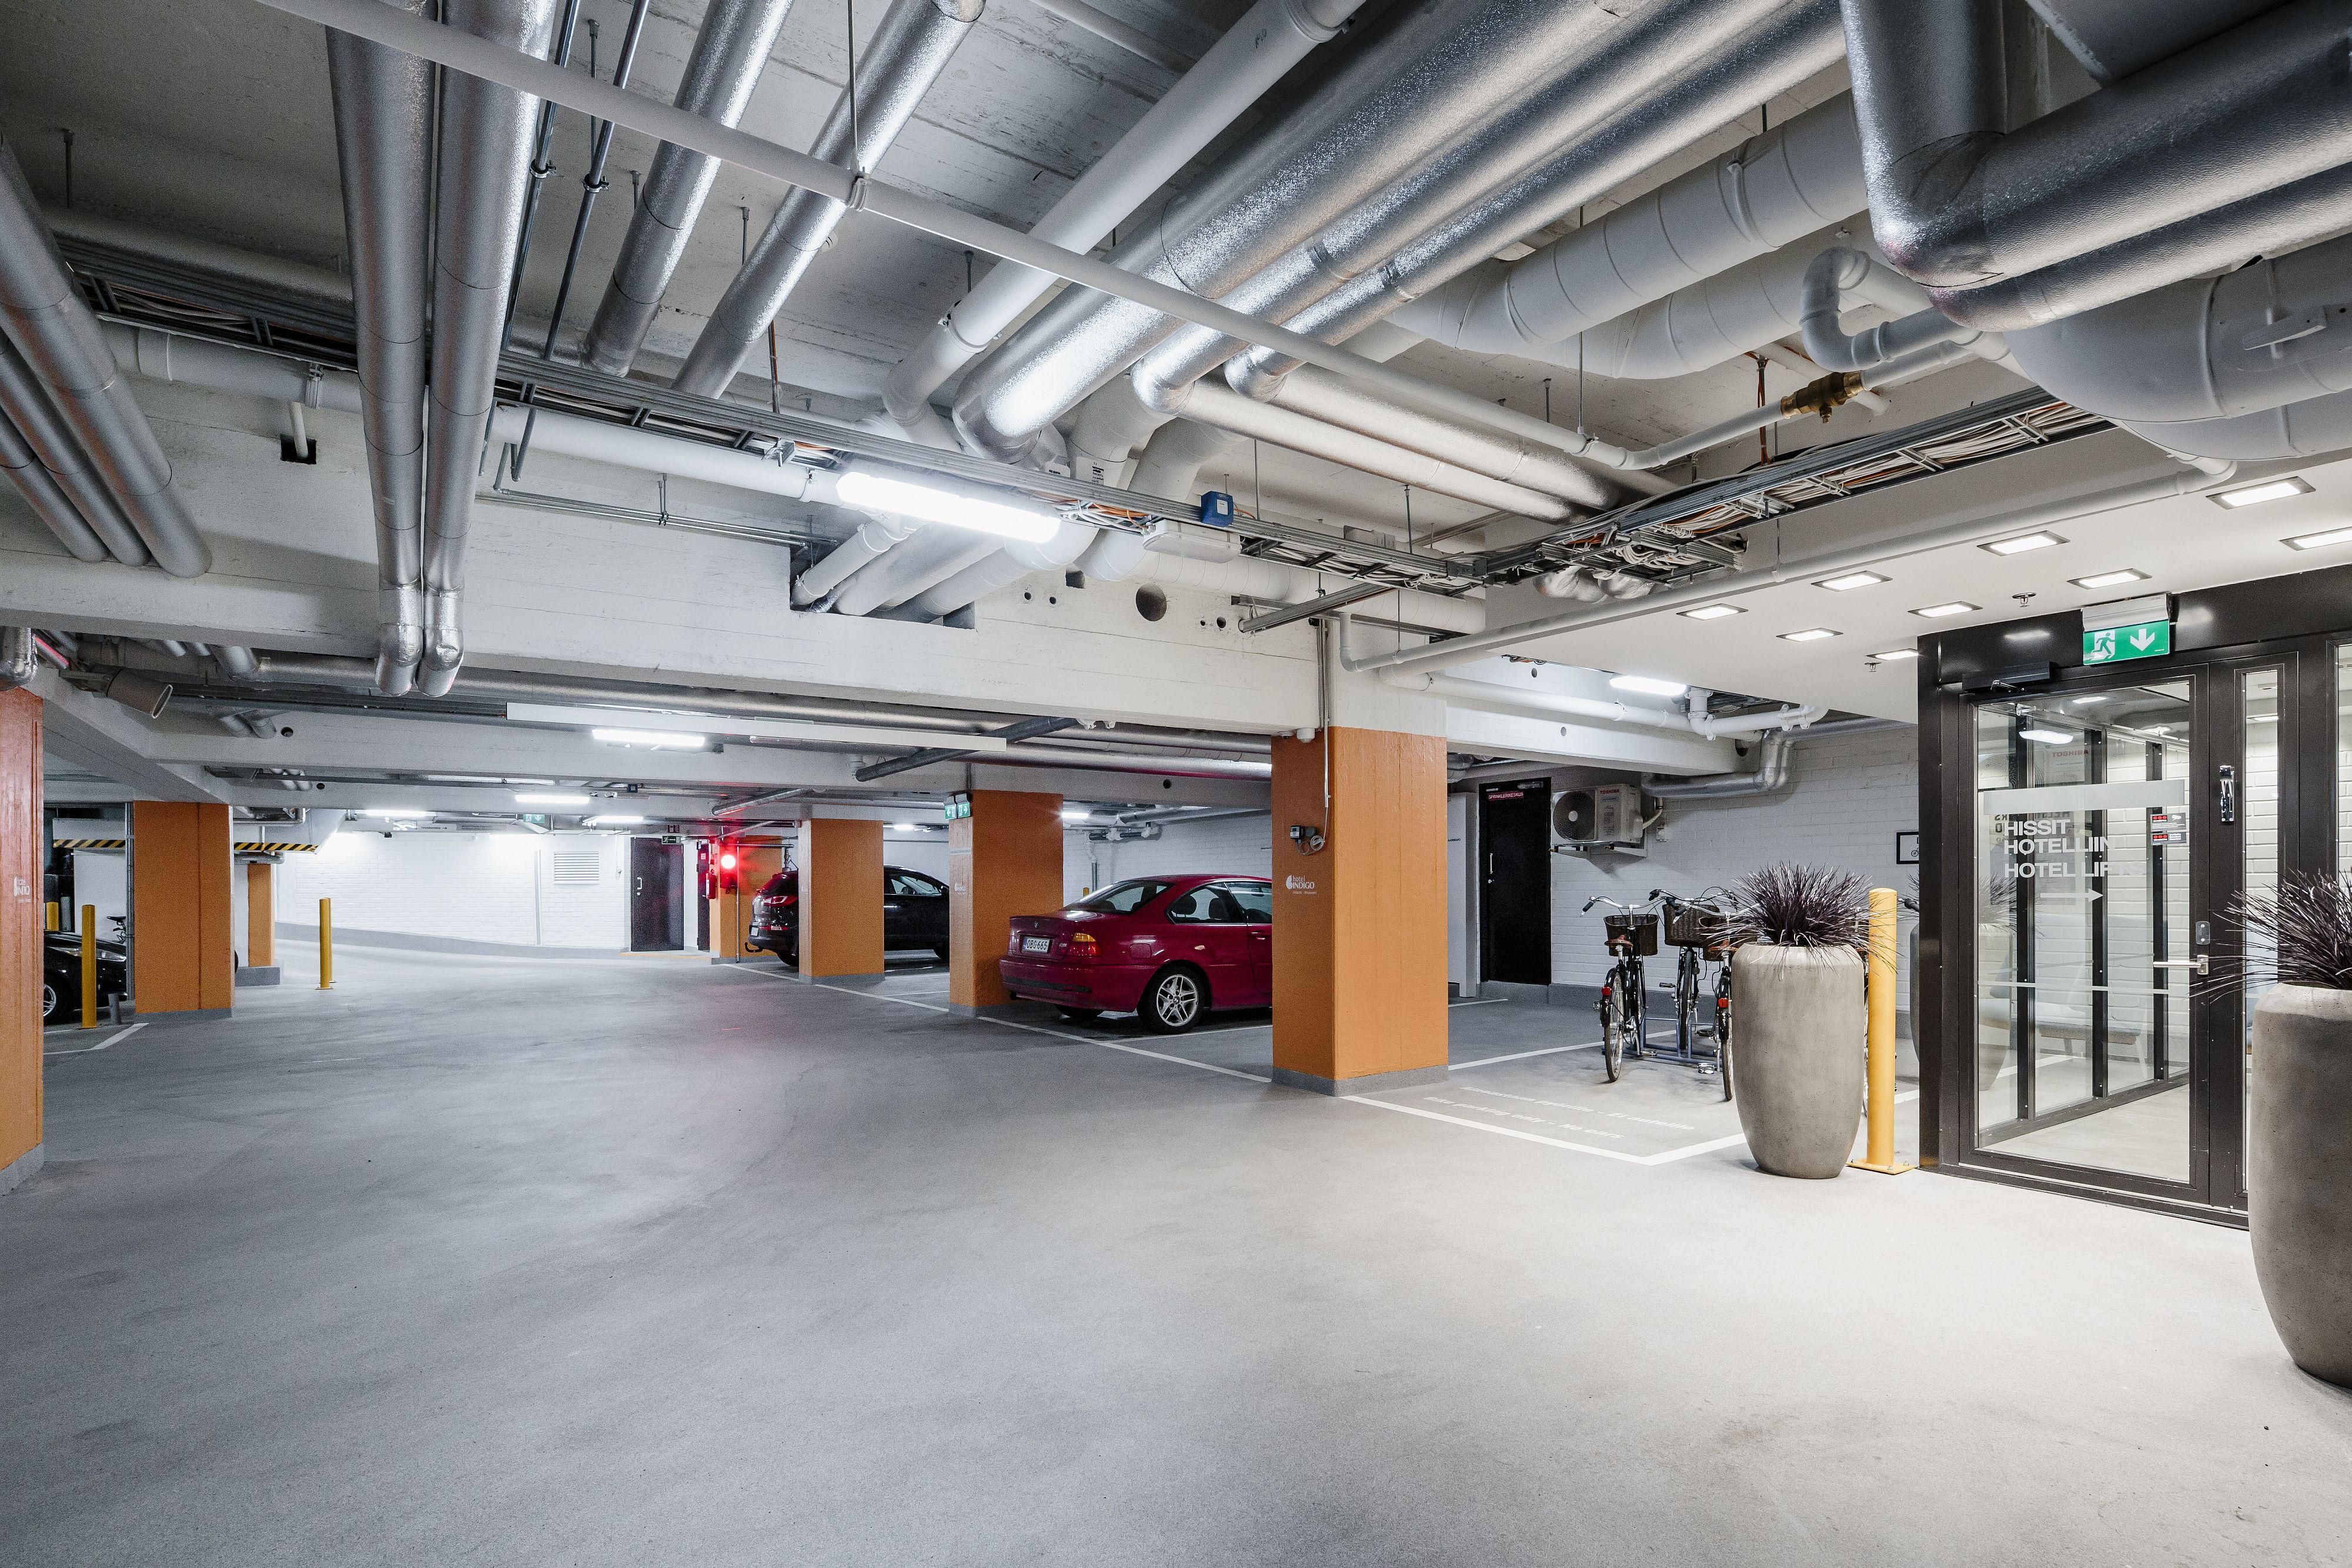 Not in our neighbourhood. Our hotel has its own garage for 35 cars, which is accessed from the driveway in front of the building to the courtyard. There is a direct lift from the garage to the hotel reception. The garage also has two charging plugs for electric cars.